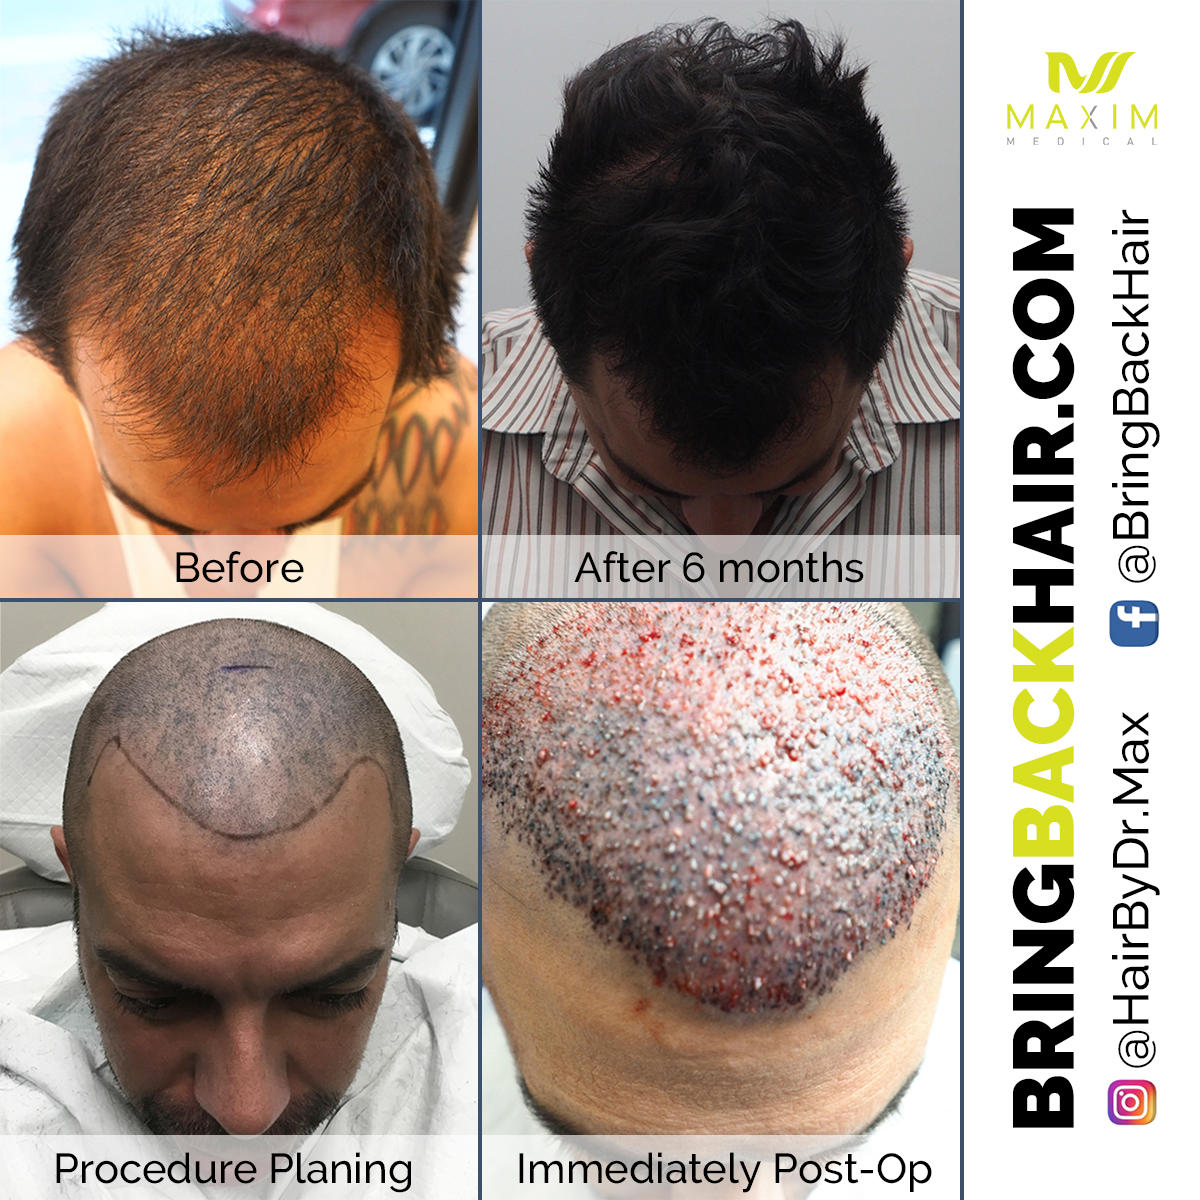 Using ARTAS robotic technology, Dr. Chumak helped restore Francesco’s hair to its full vitality. Want your hair back too? Visit our website to see just how at www.bringbackhair.com , along with other testimonials!